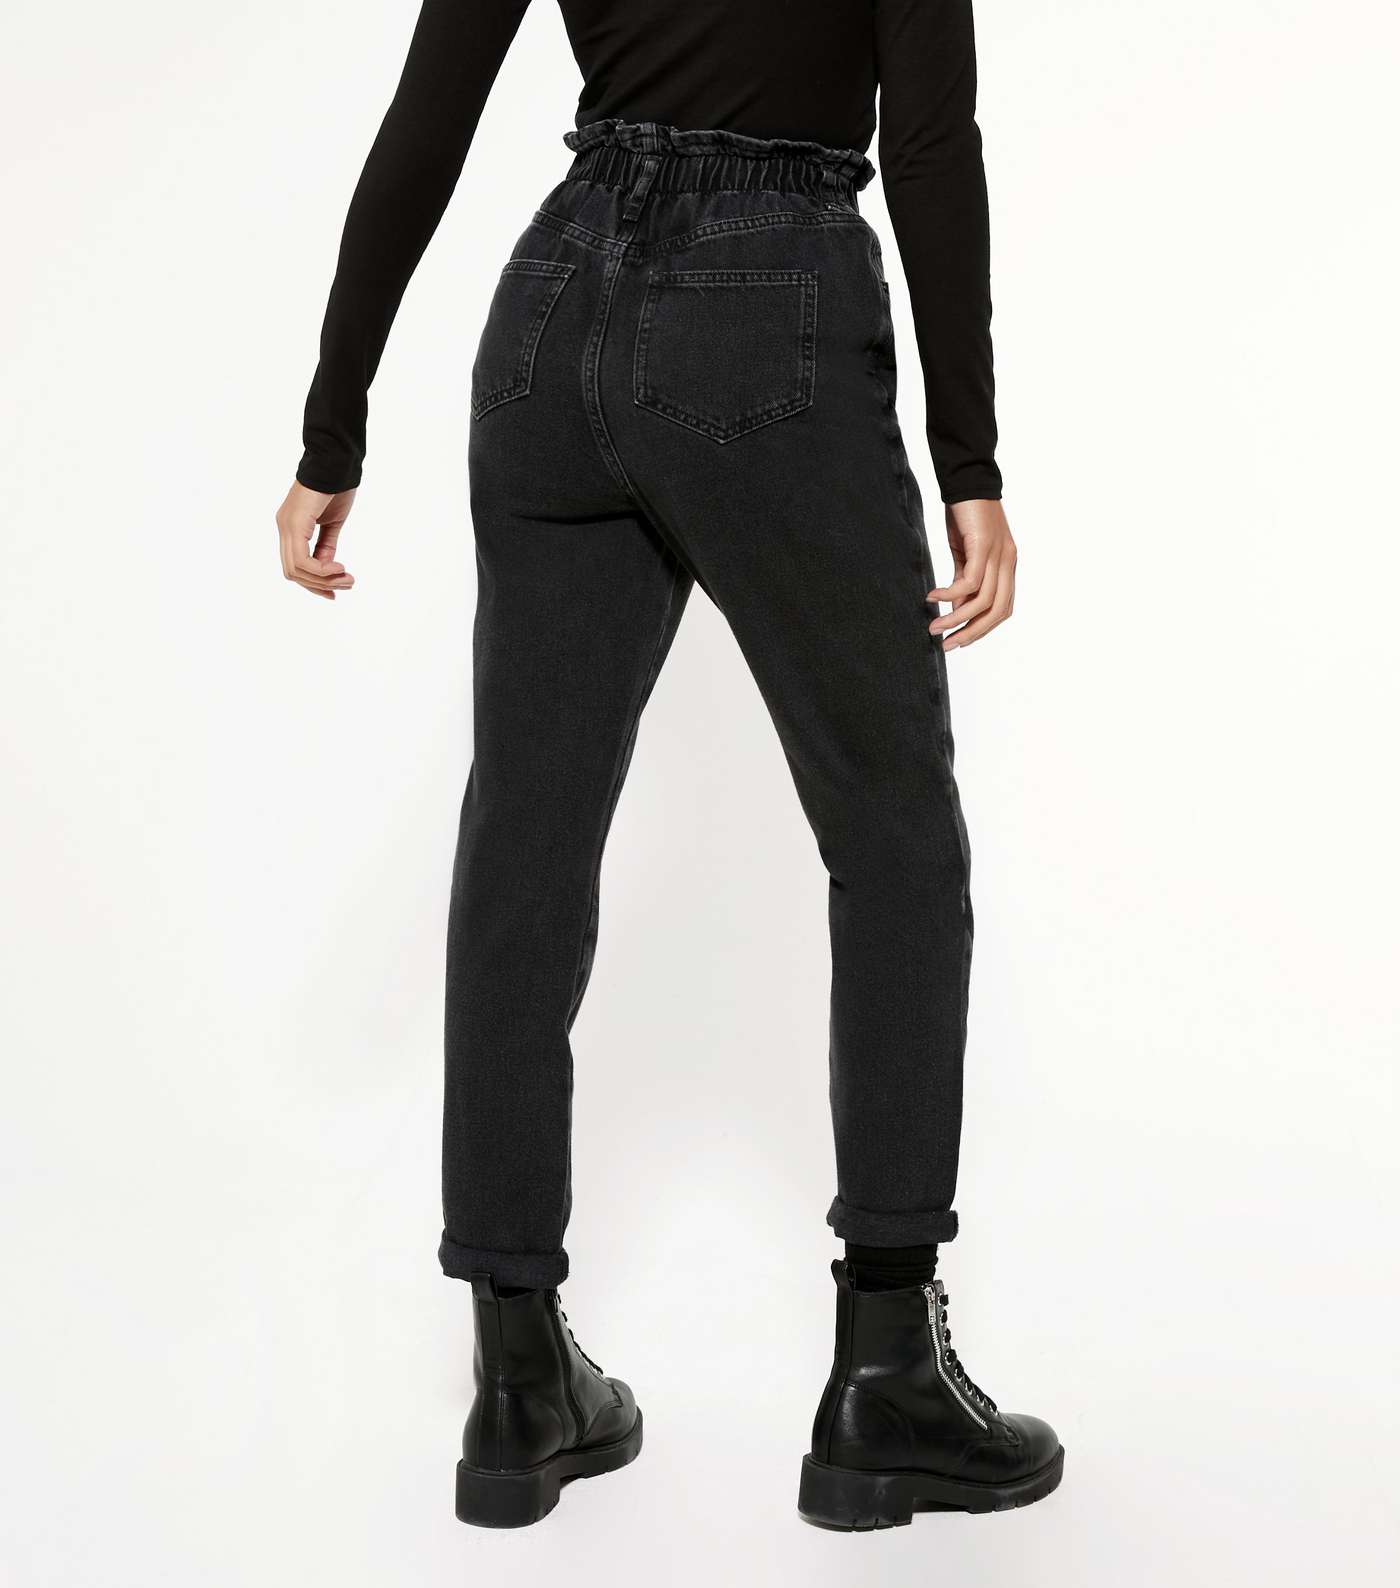 Black Elasticated High Waist Dayna Tapered Jeans Image 3